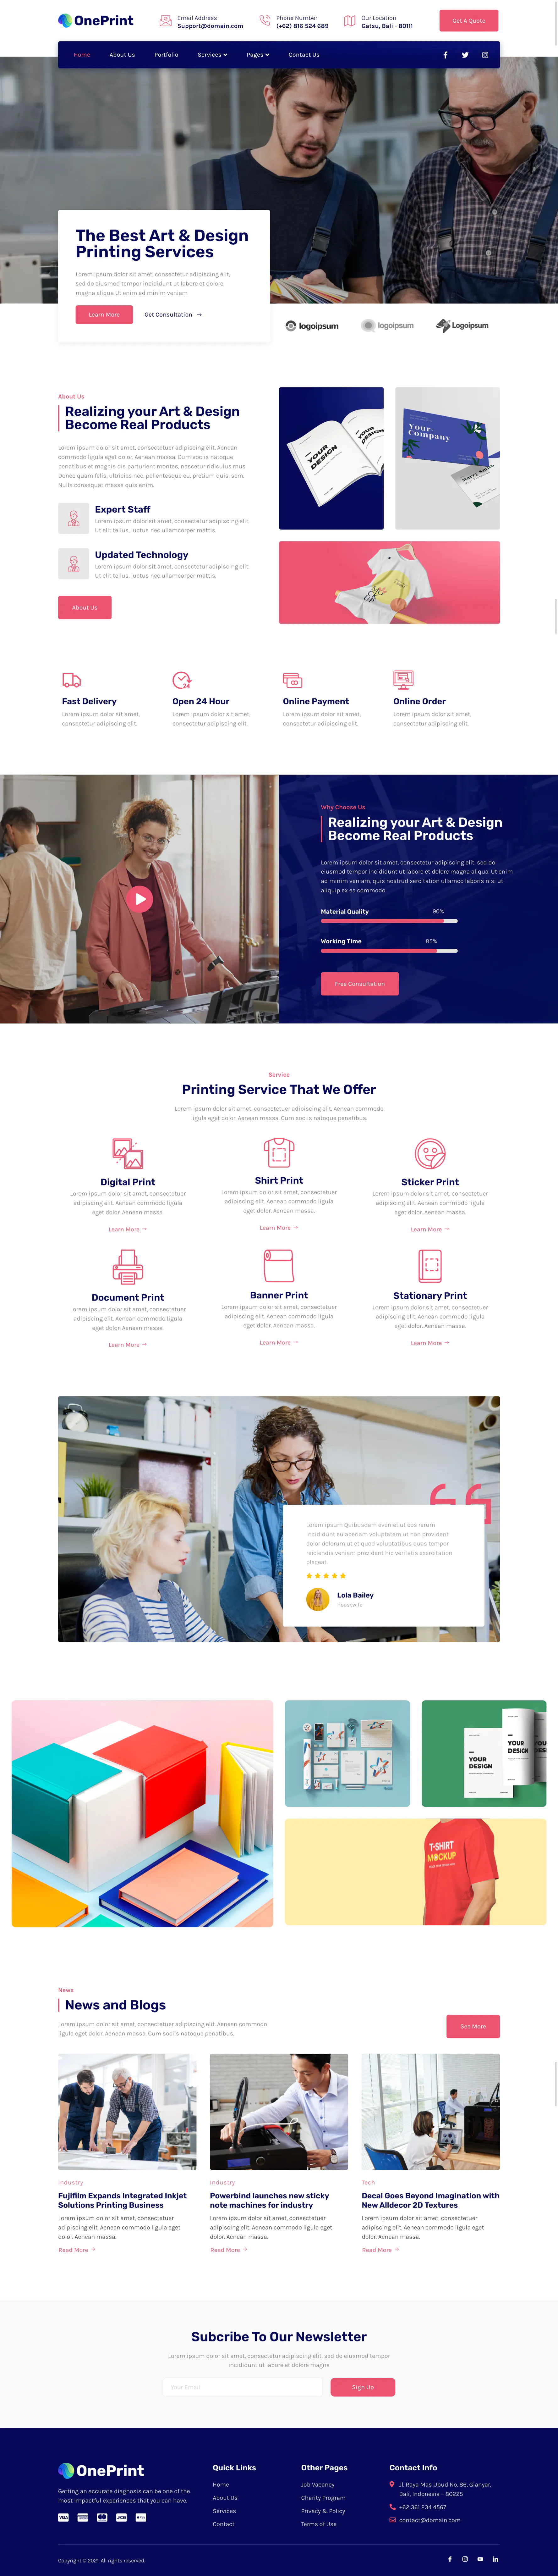 OnePrint – Printing Services Company Elementor Template Kit插图5